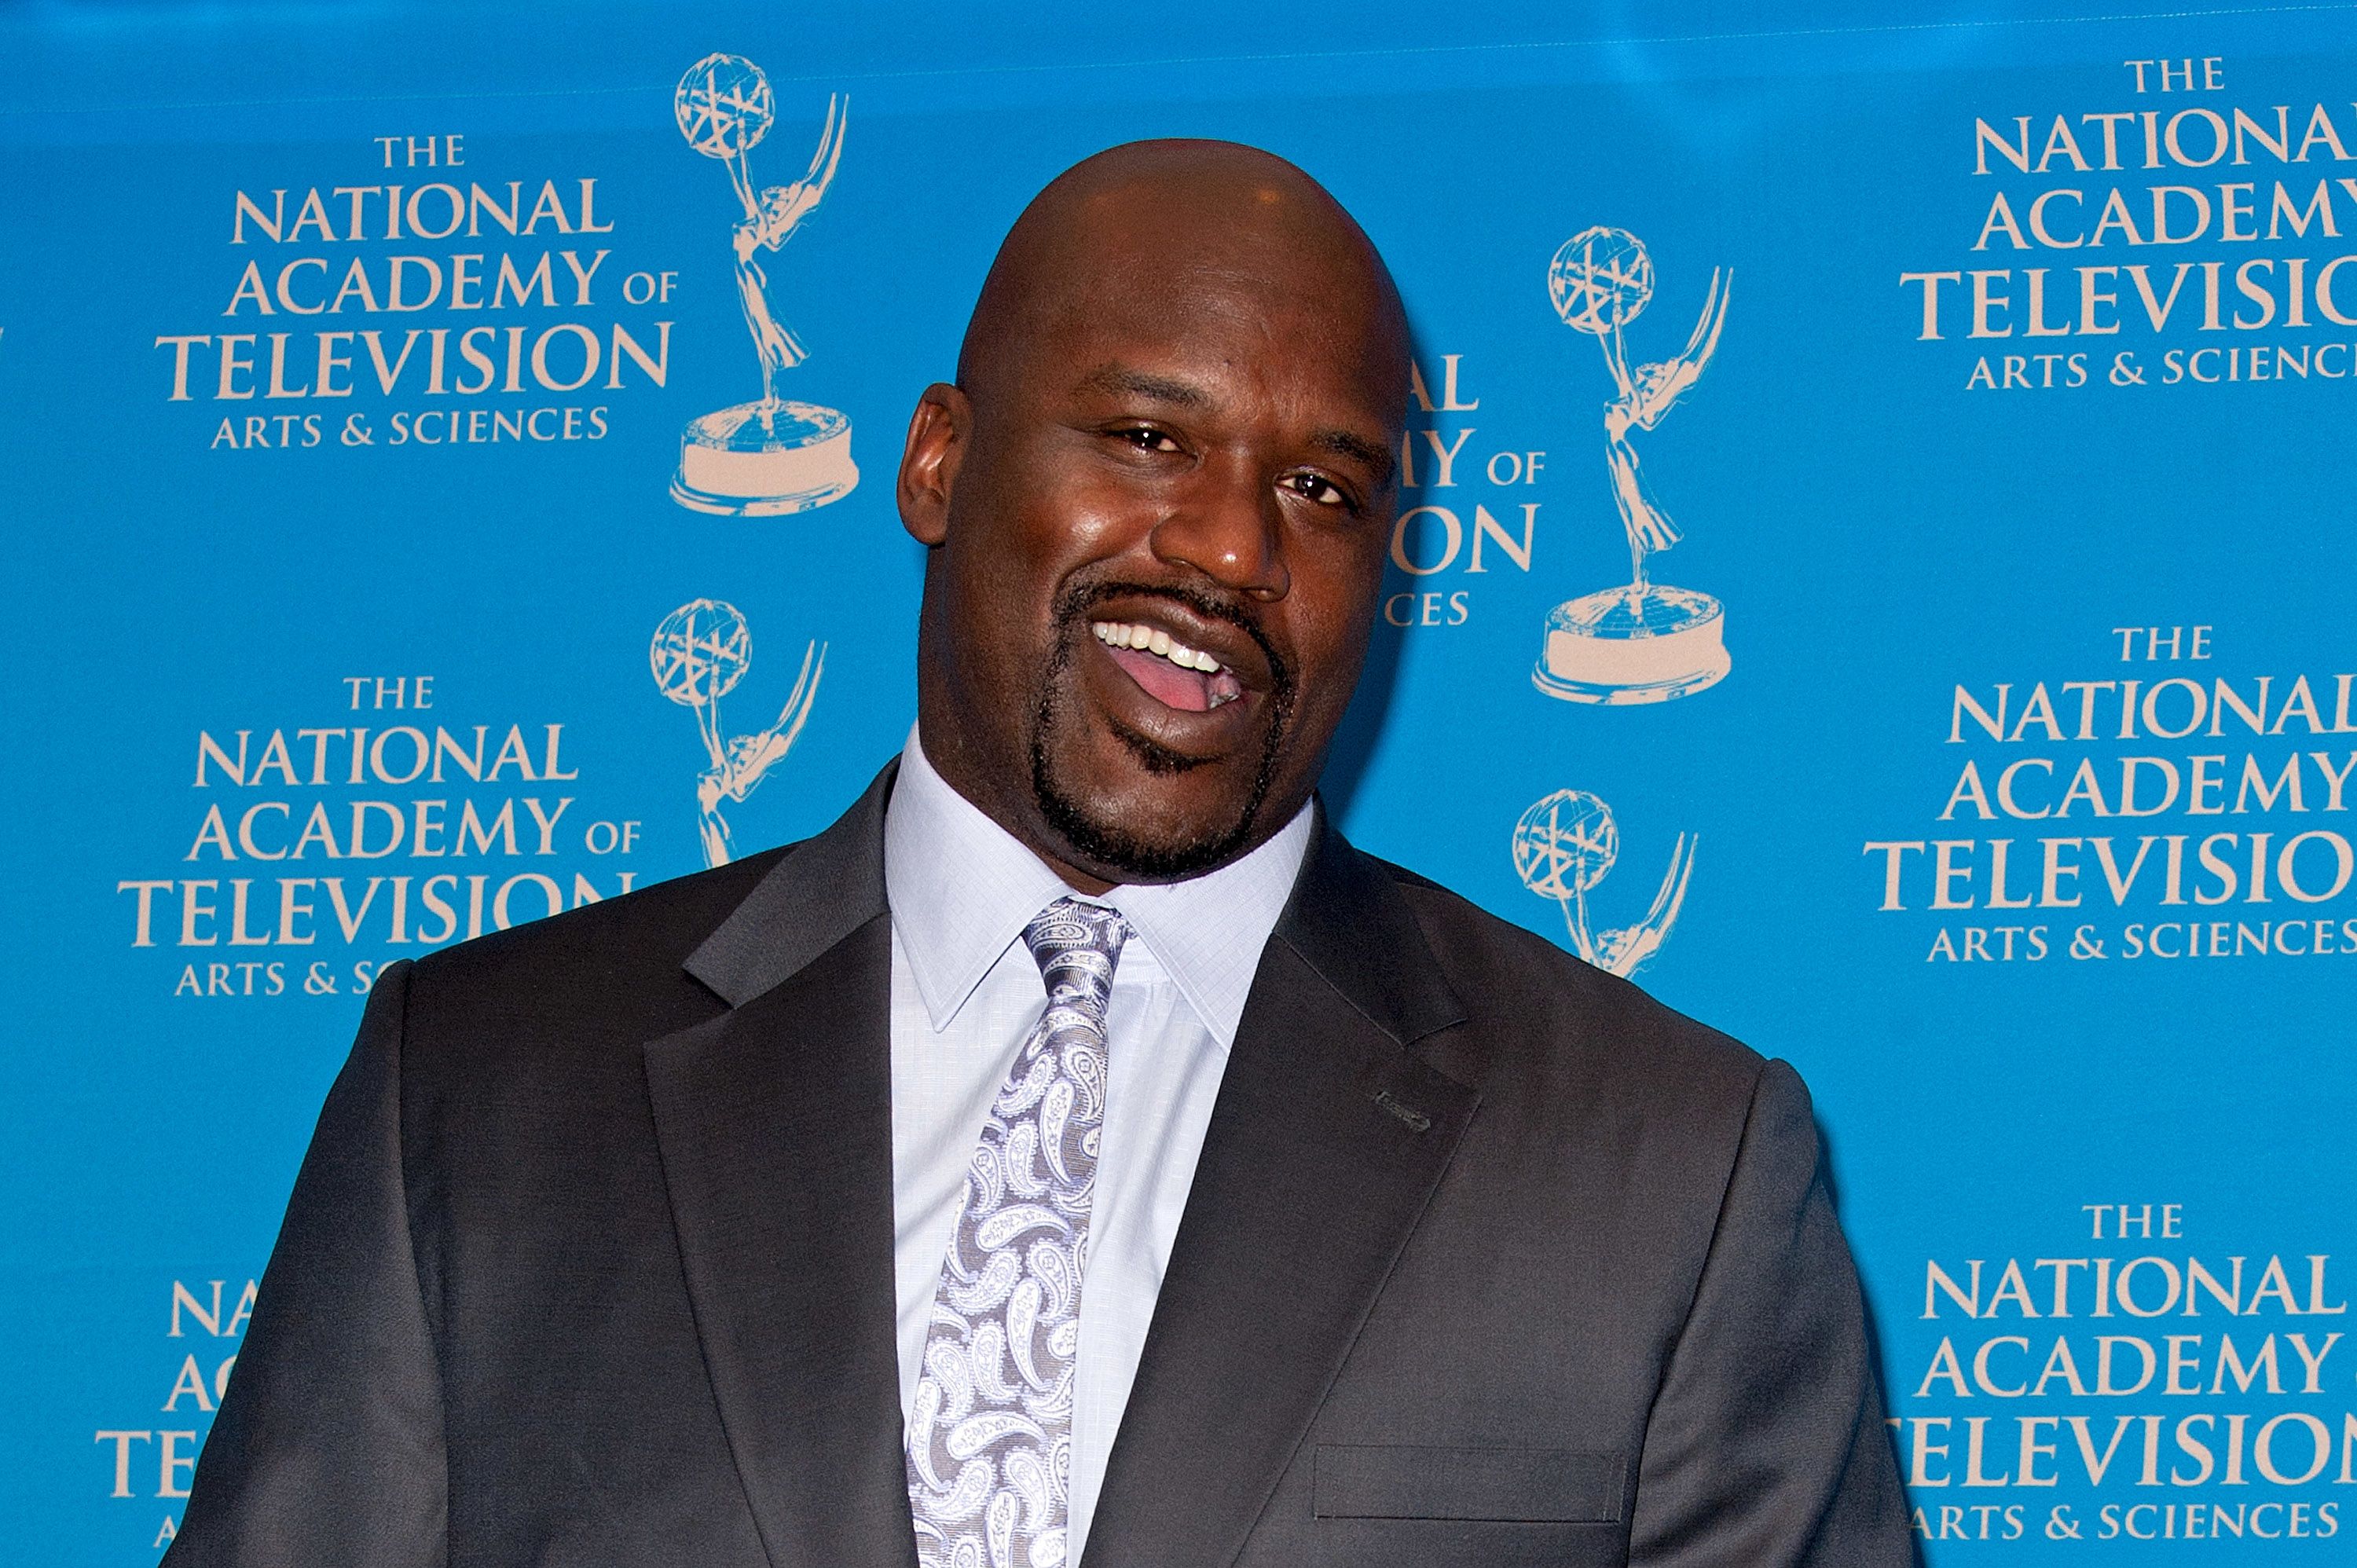 Shaquille O'Neal to receive doctorate degree